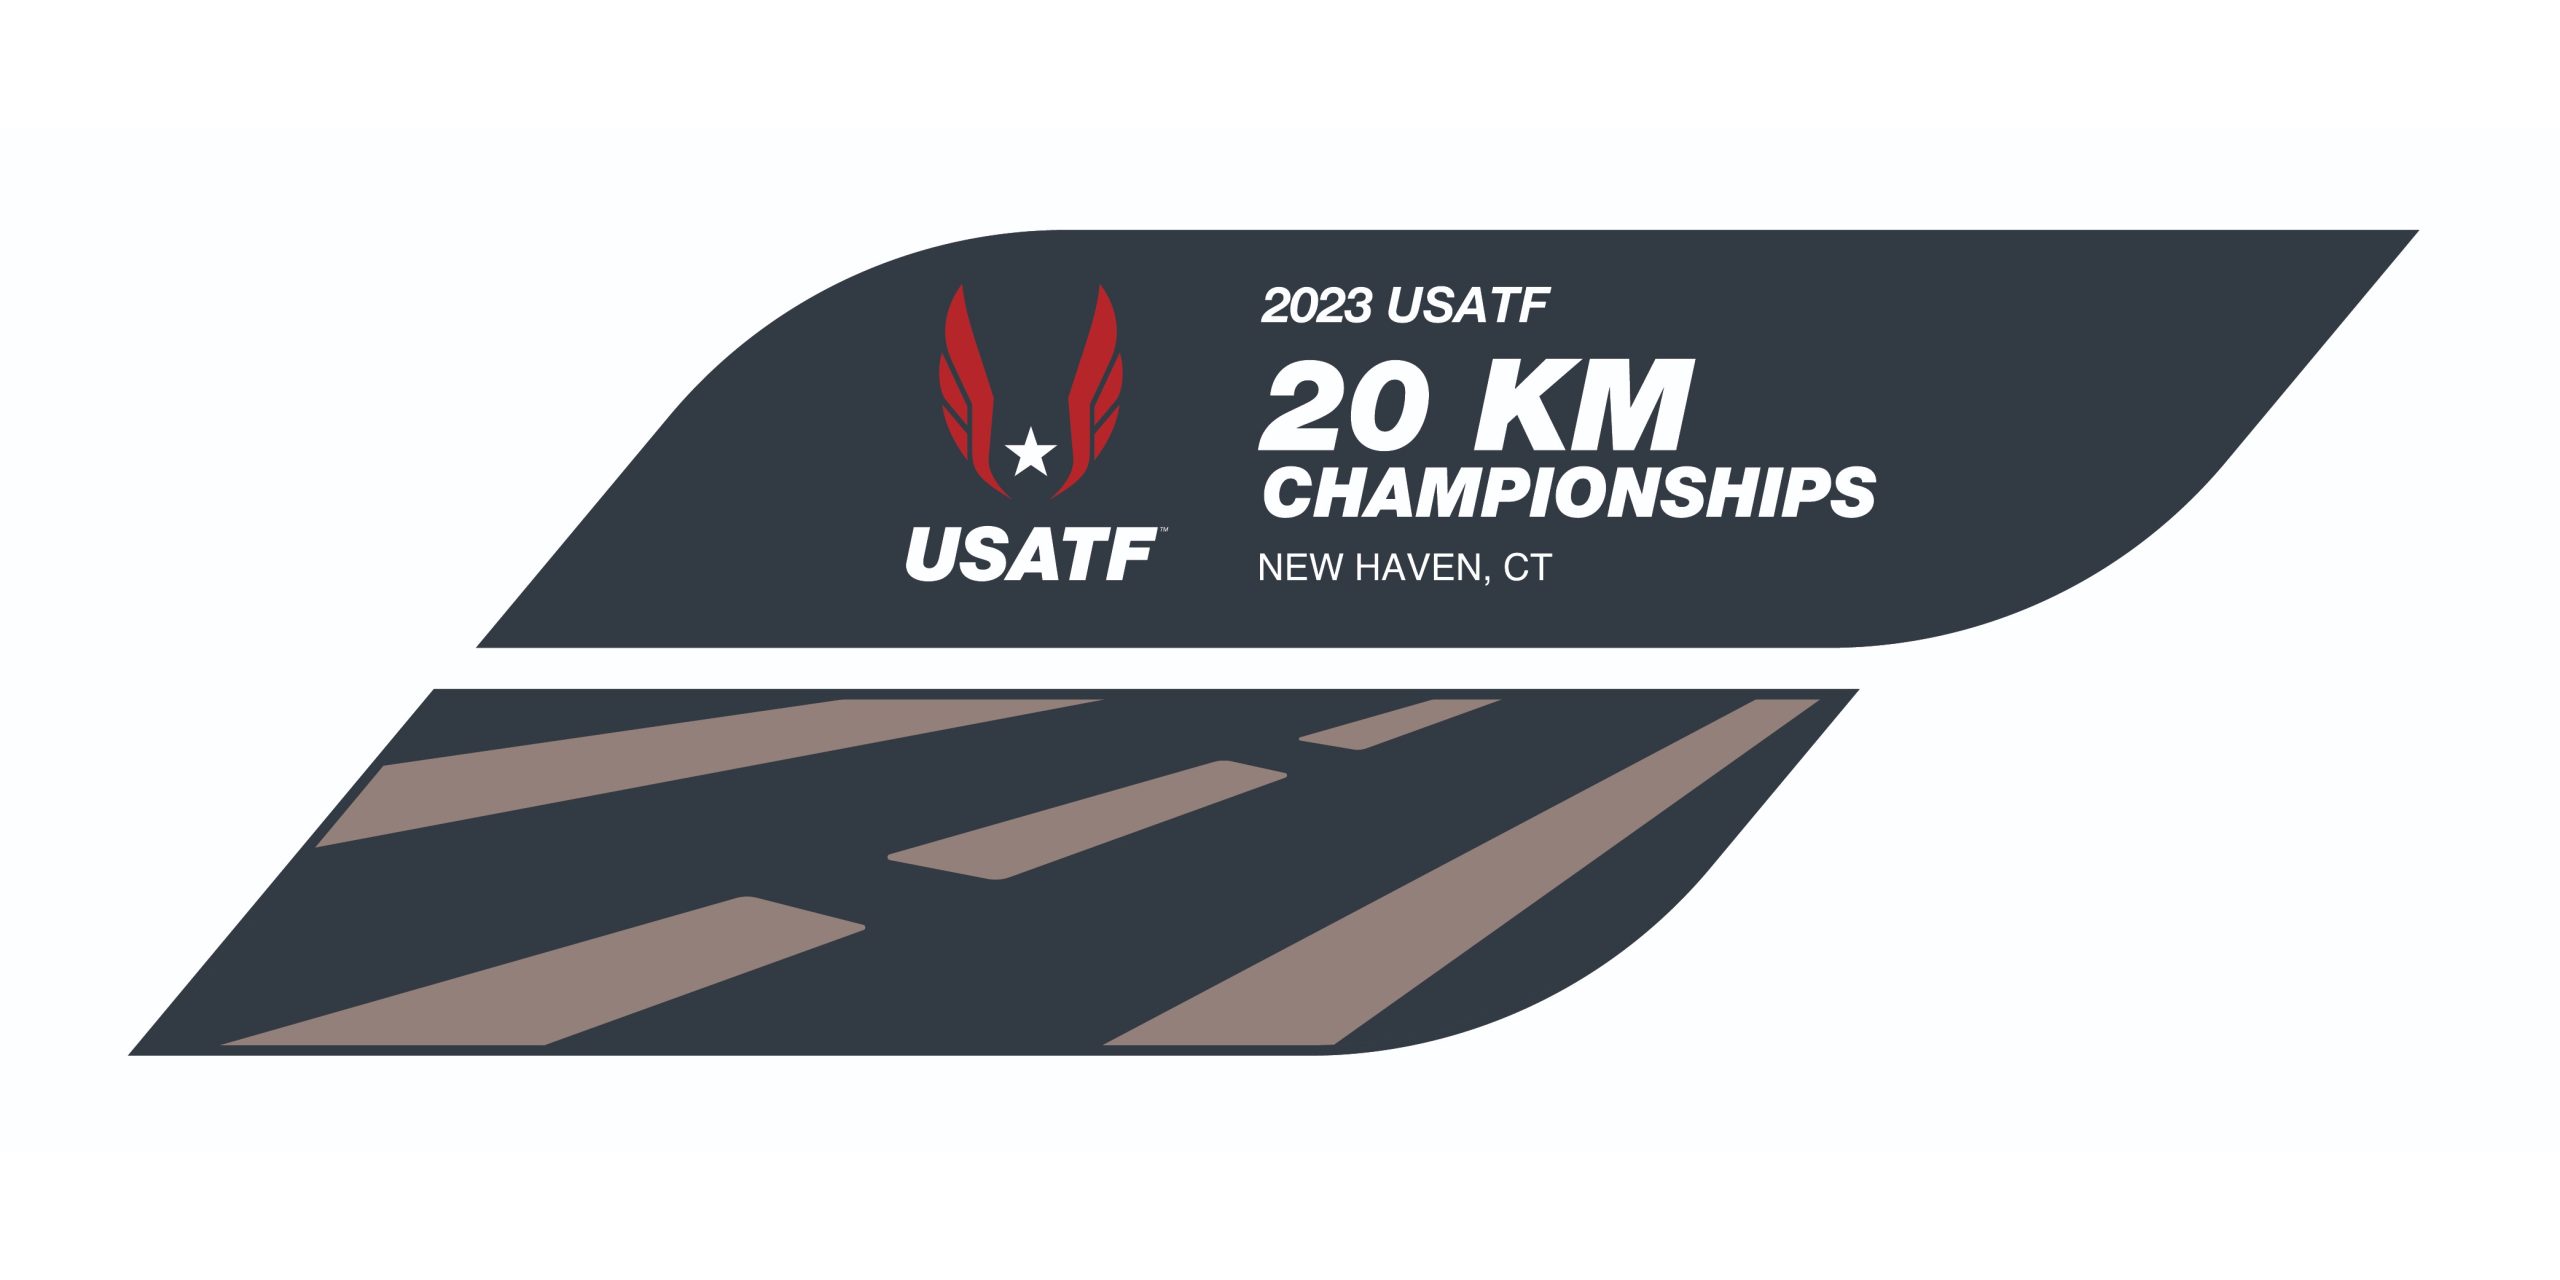 How to Watch the USATF 20 km Championships track and